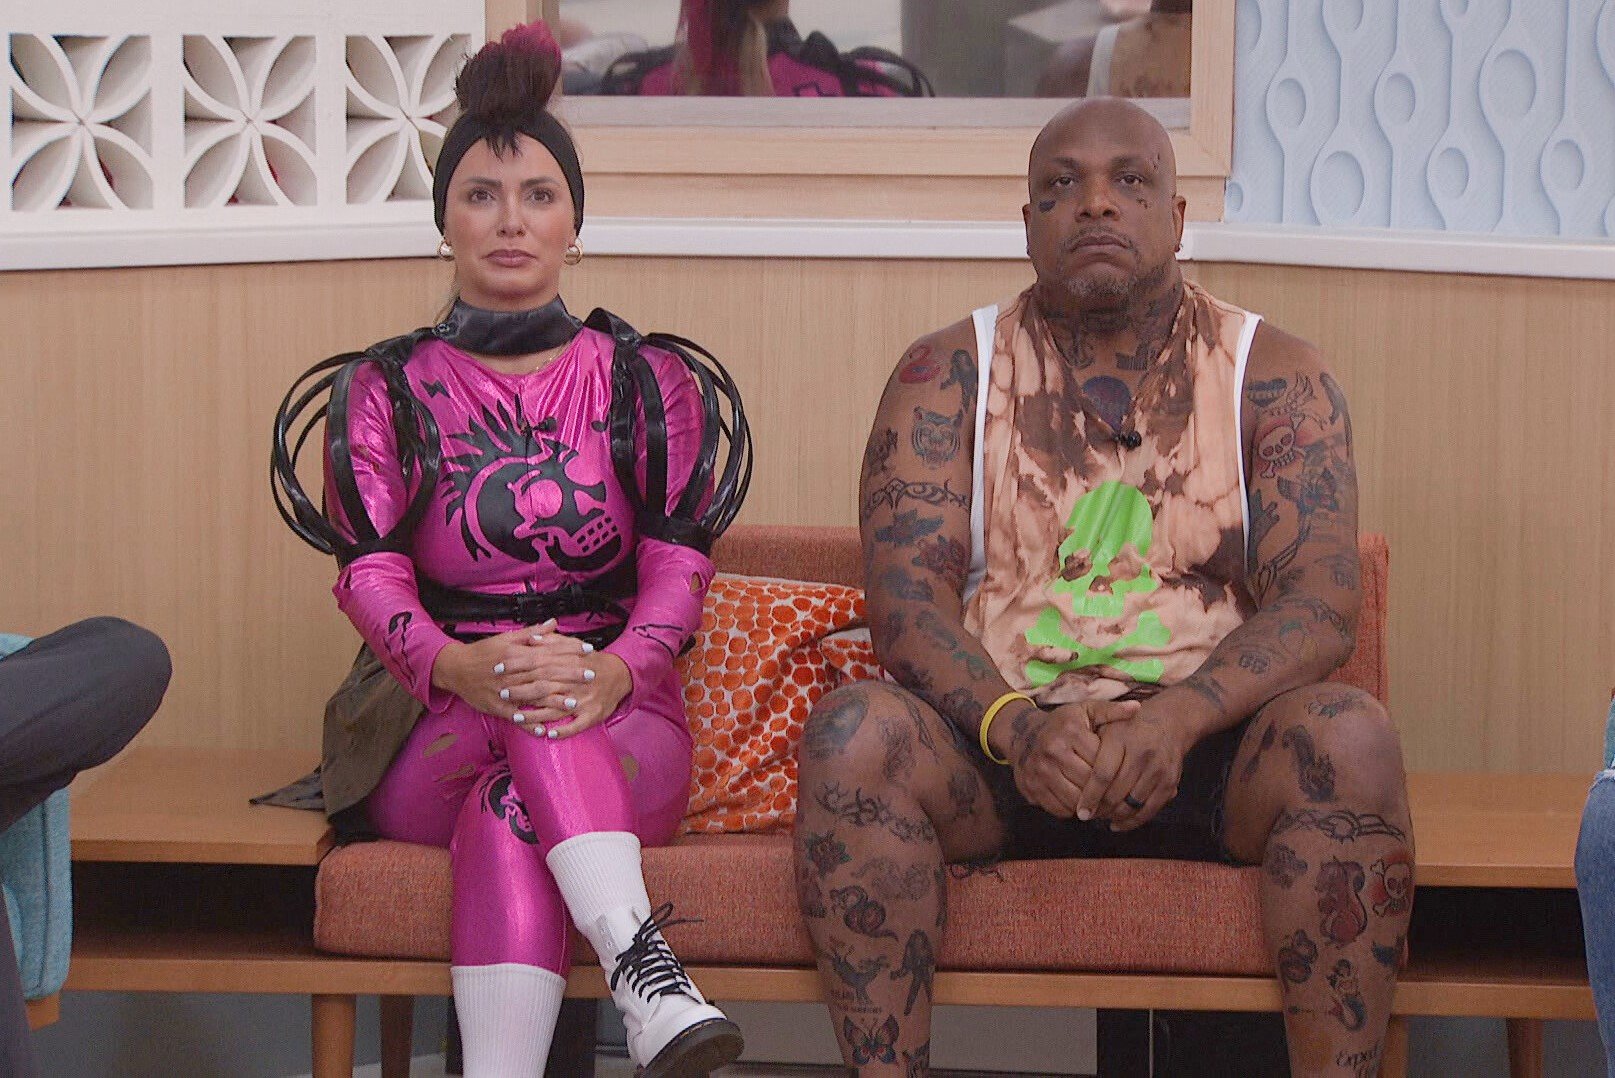 Indy Santos and Terrance Higgins, who starred in 'Big Brother 24' on CBS, sit next to each other on the nomination couch. Indy wears her pink and black punk rocker unitard. Terrance wears a brown and green tie dye tank top and black shorts.